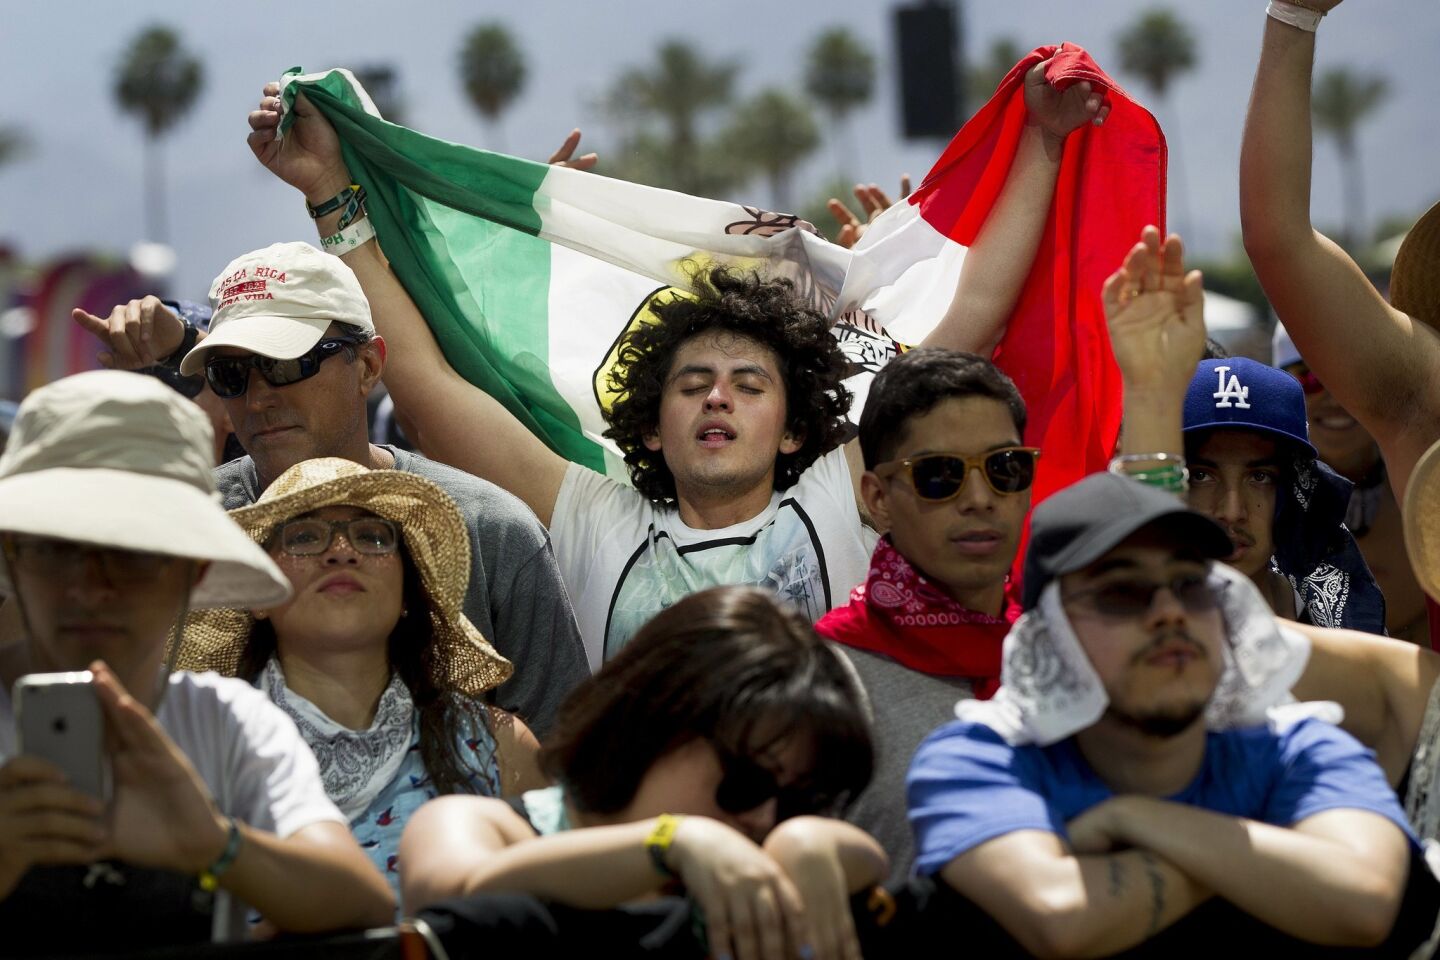 Day two of the 2015 Coachella Valley Music and Arts Festival . A dedicated fan base made their way to see The Nortec Collective, a Tijuana, Mexico band who played the Coachella Stage Saturday.